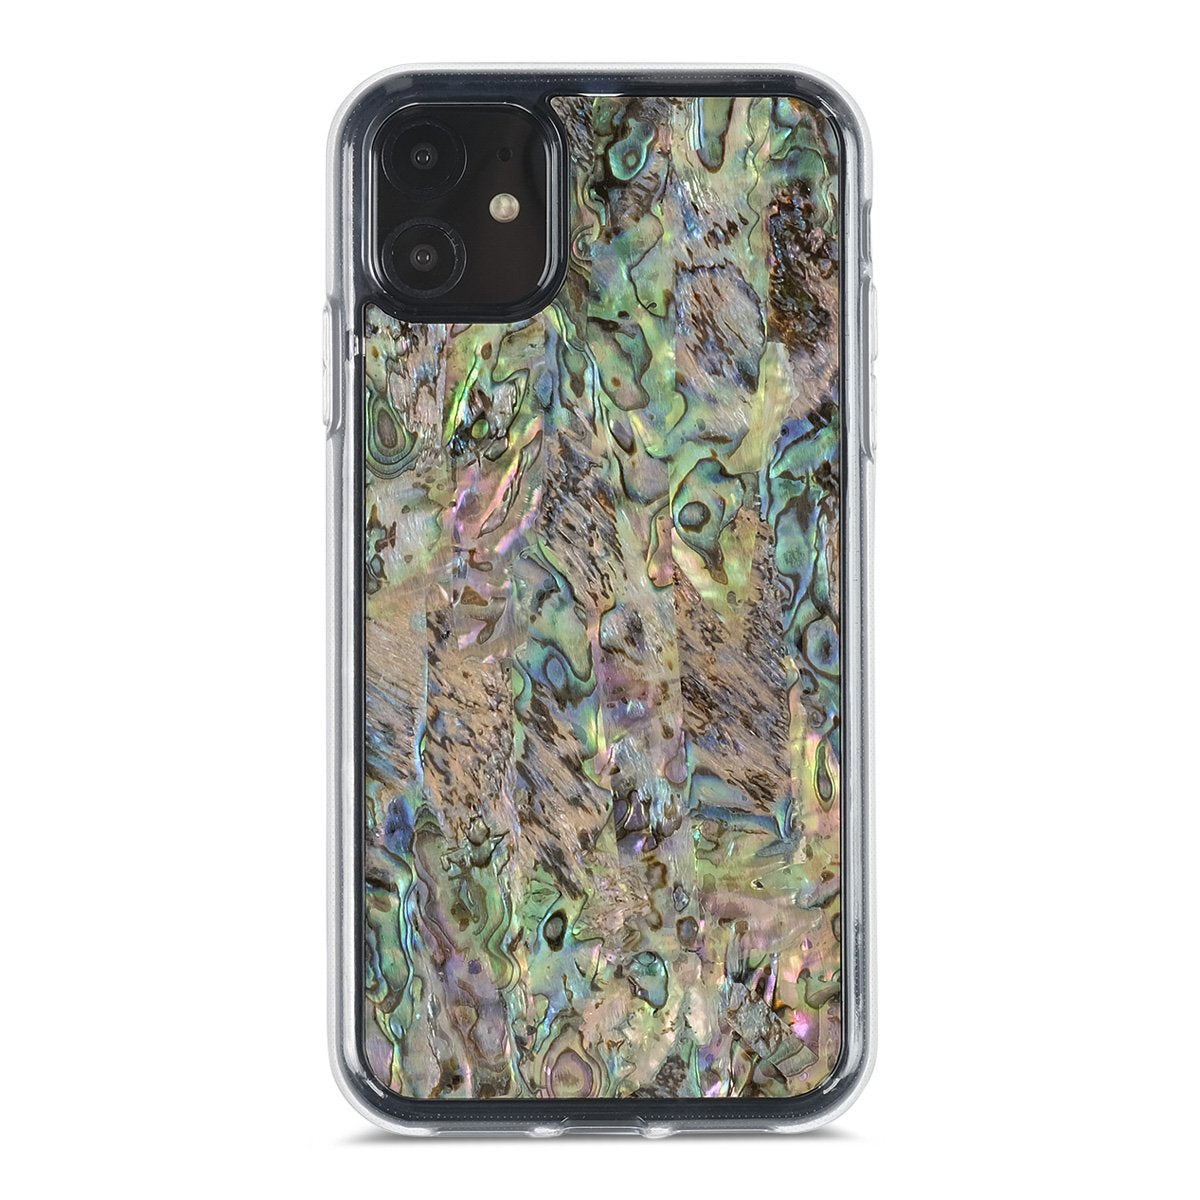 iPhone 11 Pro Max — Shell Explorer Clear Case